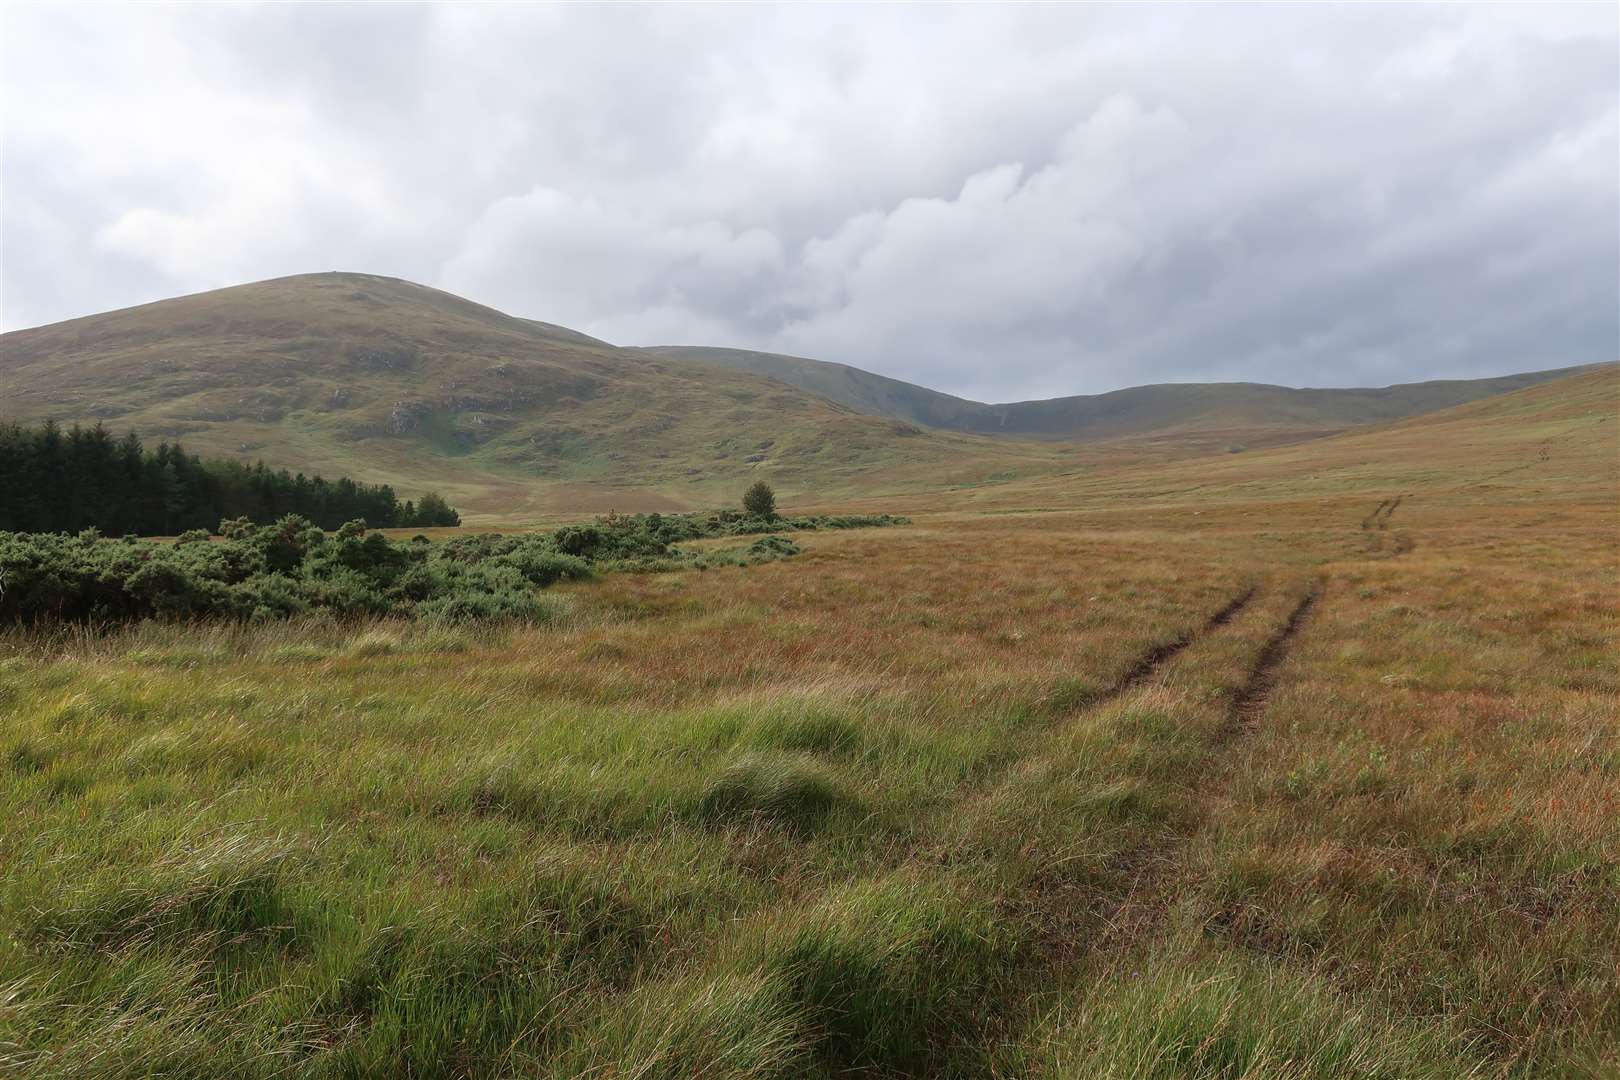 Looking towards Ben Klibreck from Crask – north of the proposed area for the wind farm.